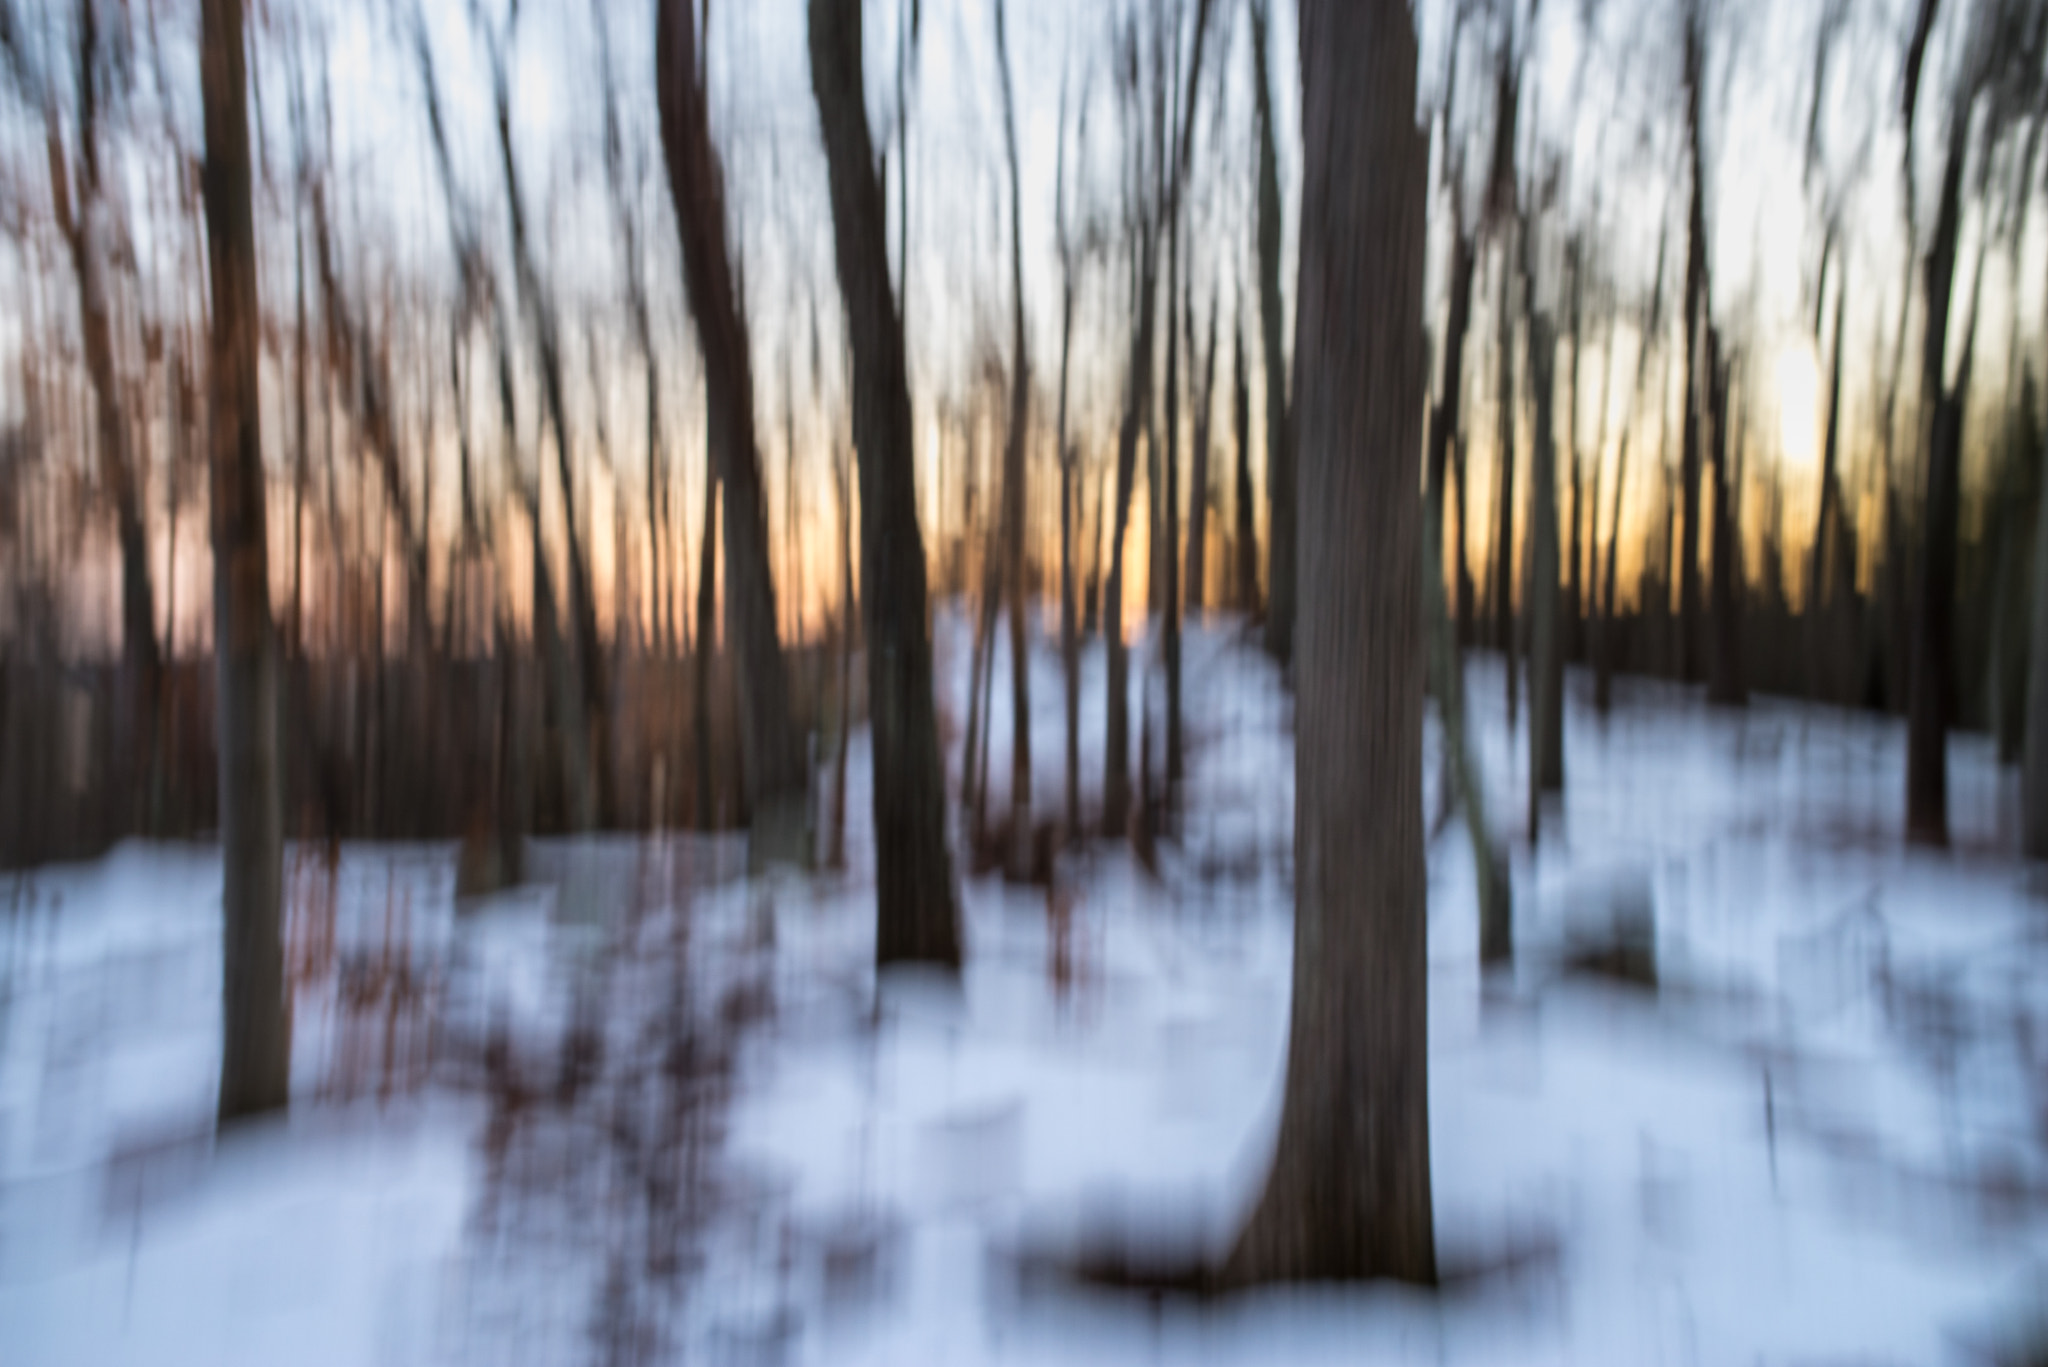 Pentax K-1 + Sigma 35mm F1.4 DG HSM Art sample photo. Sunset in a winter forest photography